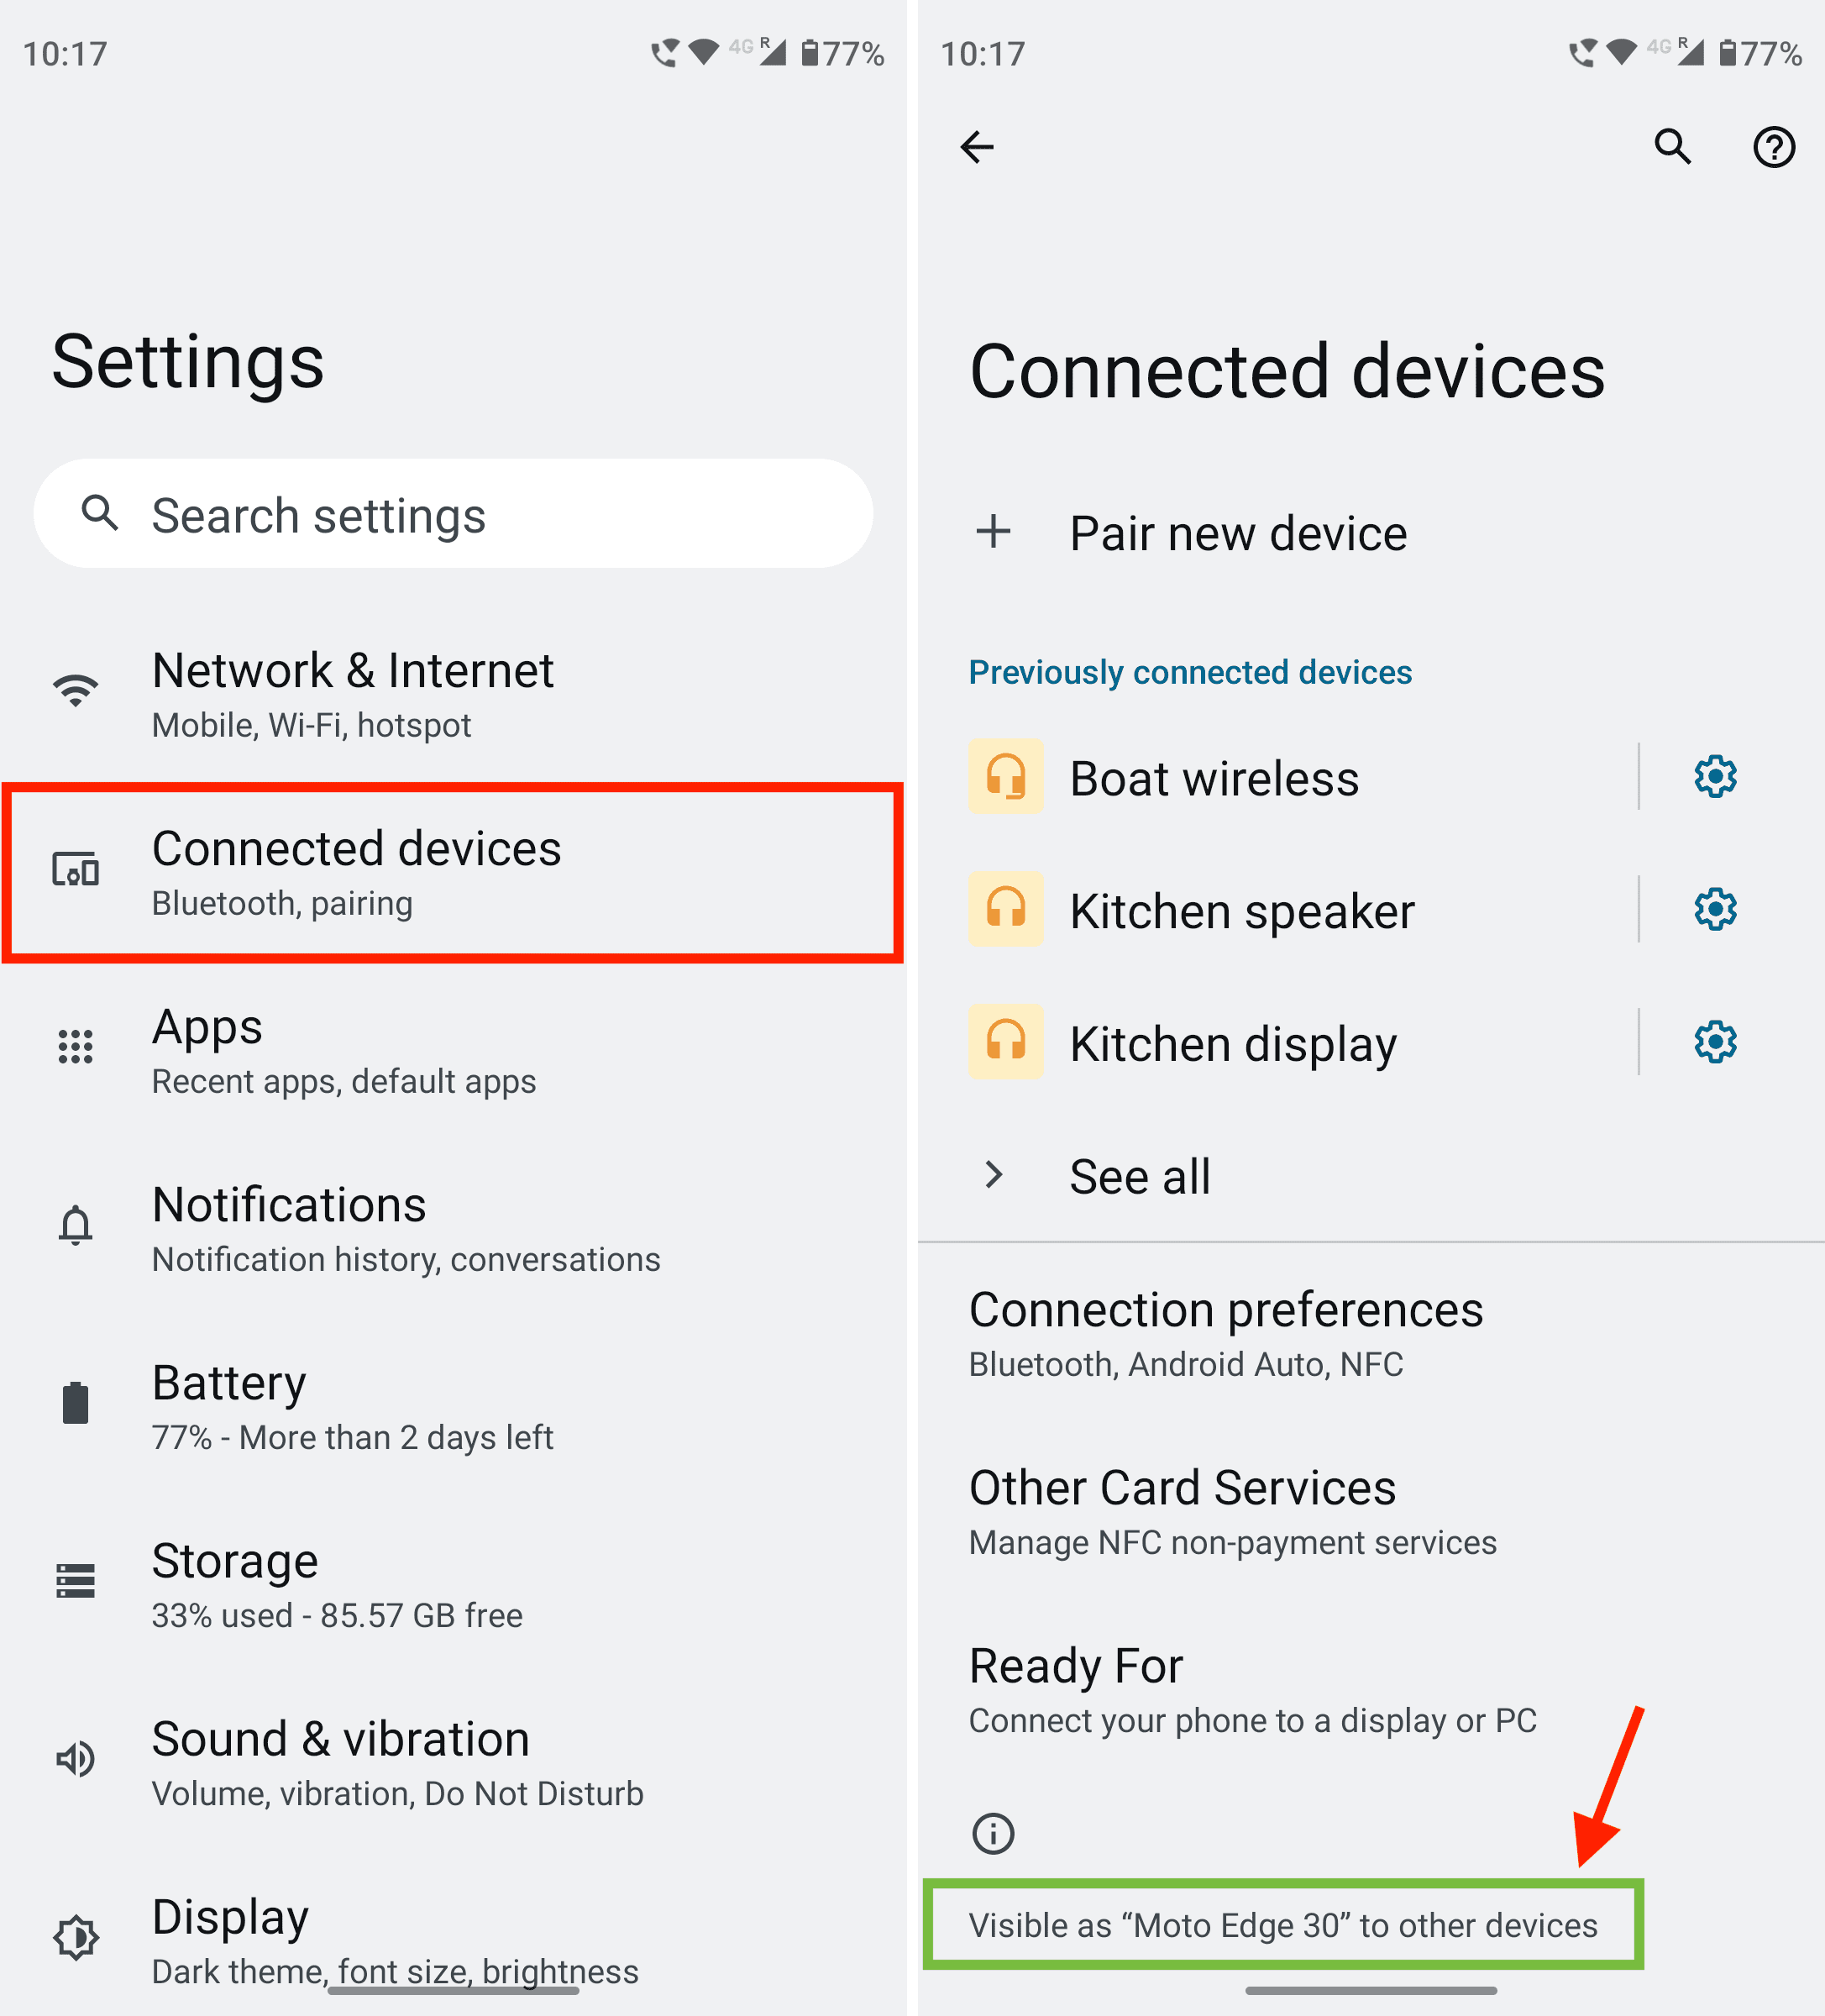 Connected devices to access Bluetooth on Android